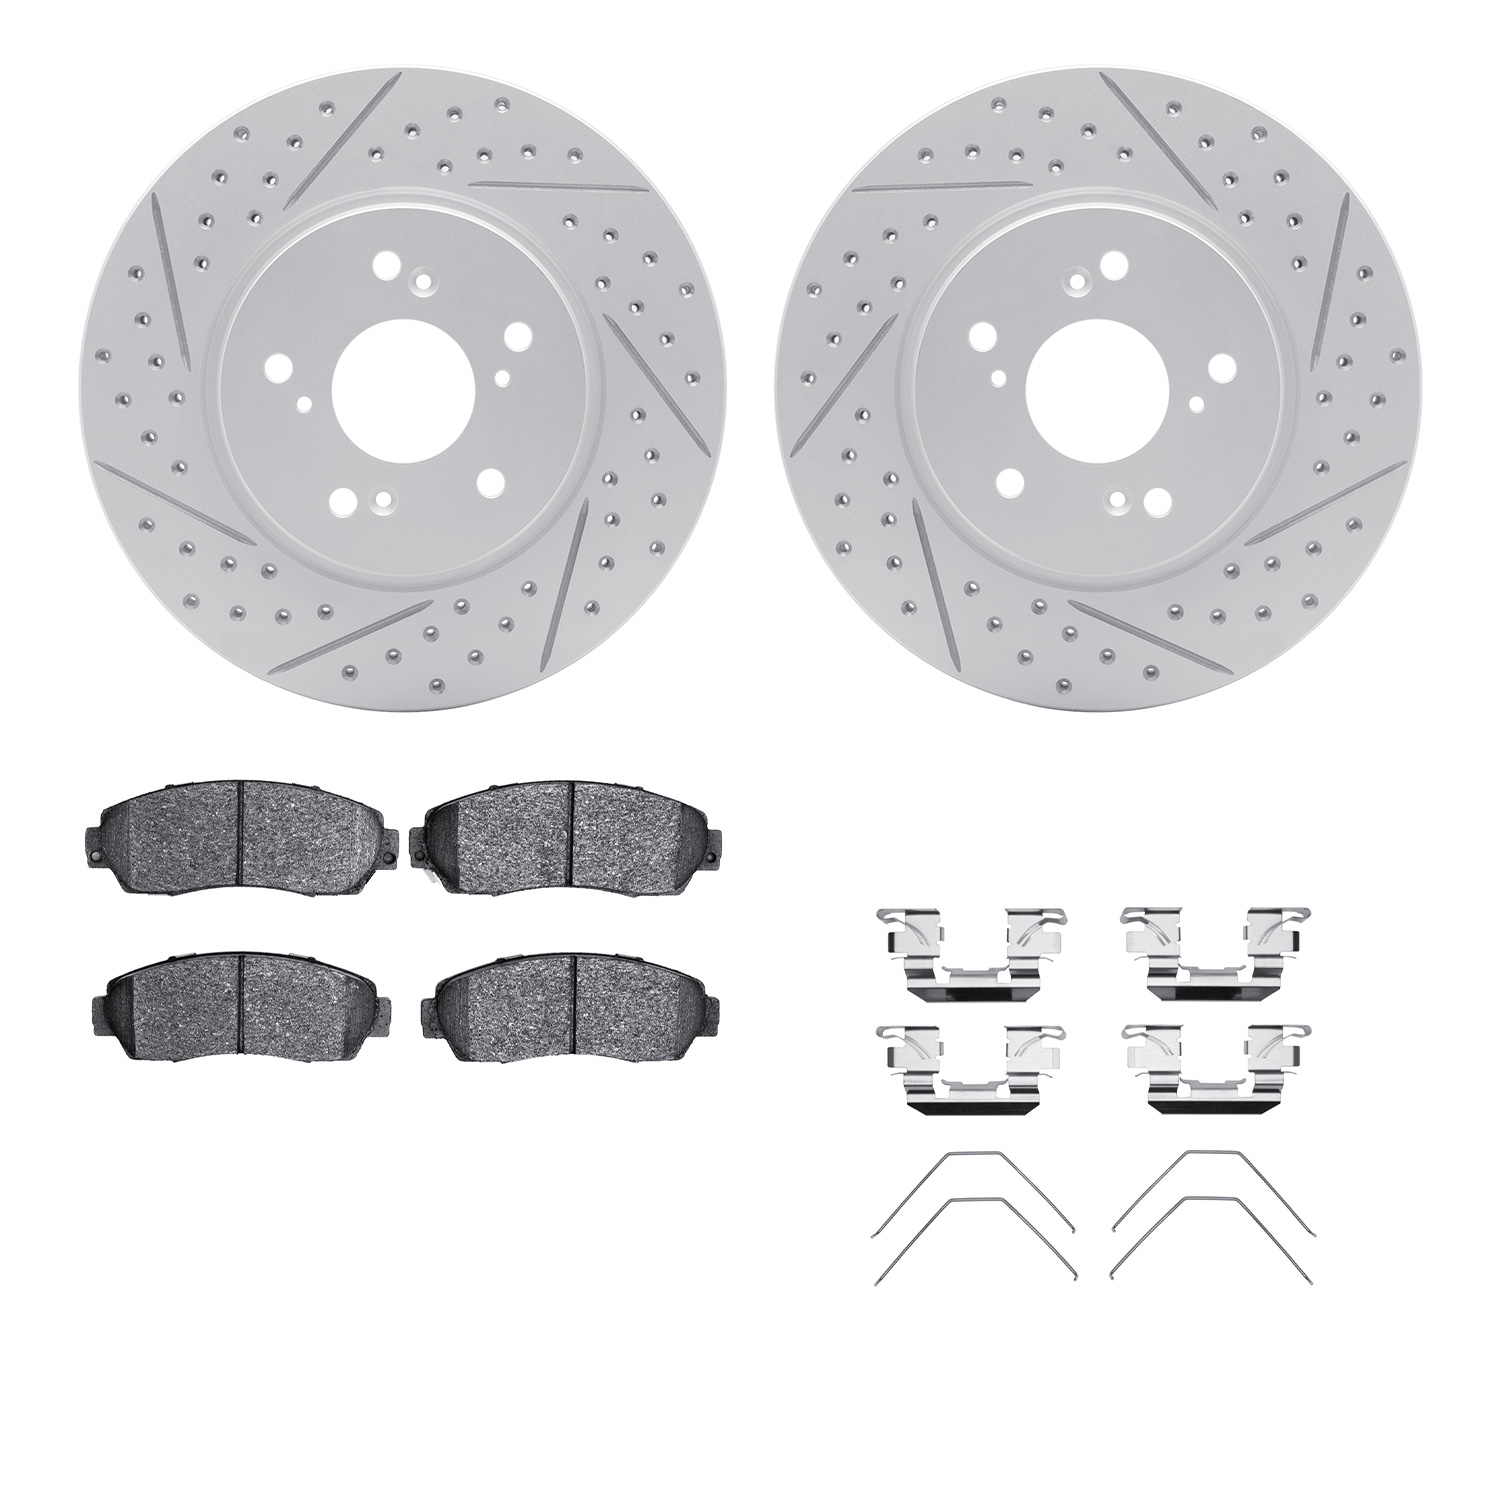 2512-59072 Geoperformance Drilled/Slotted Rotors w/5000 Advanced Brake Pads Kit & Hardware, 2007-2016 Acura/Honda, Position: Fro